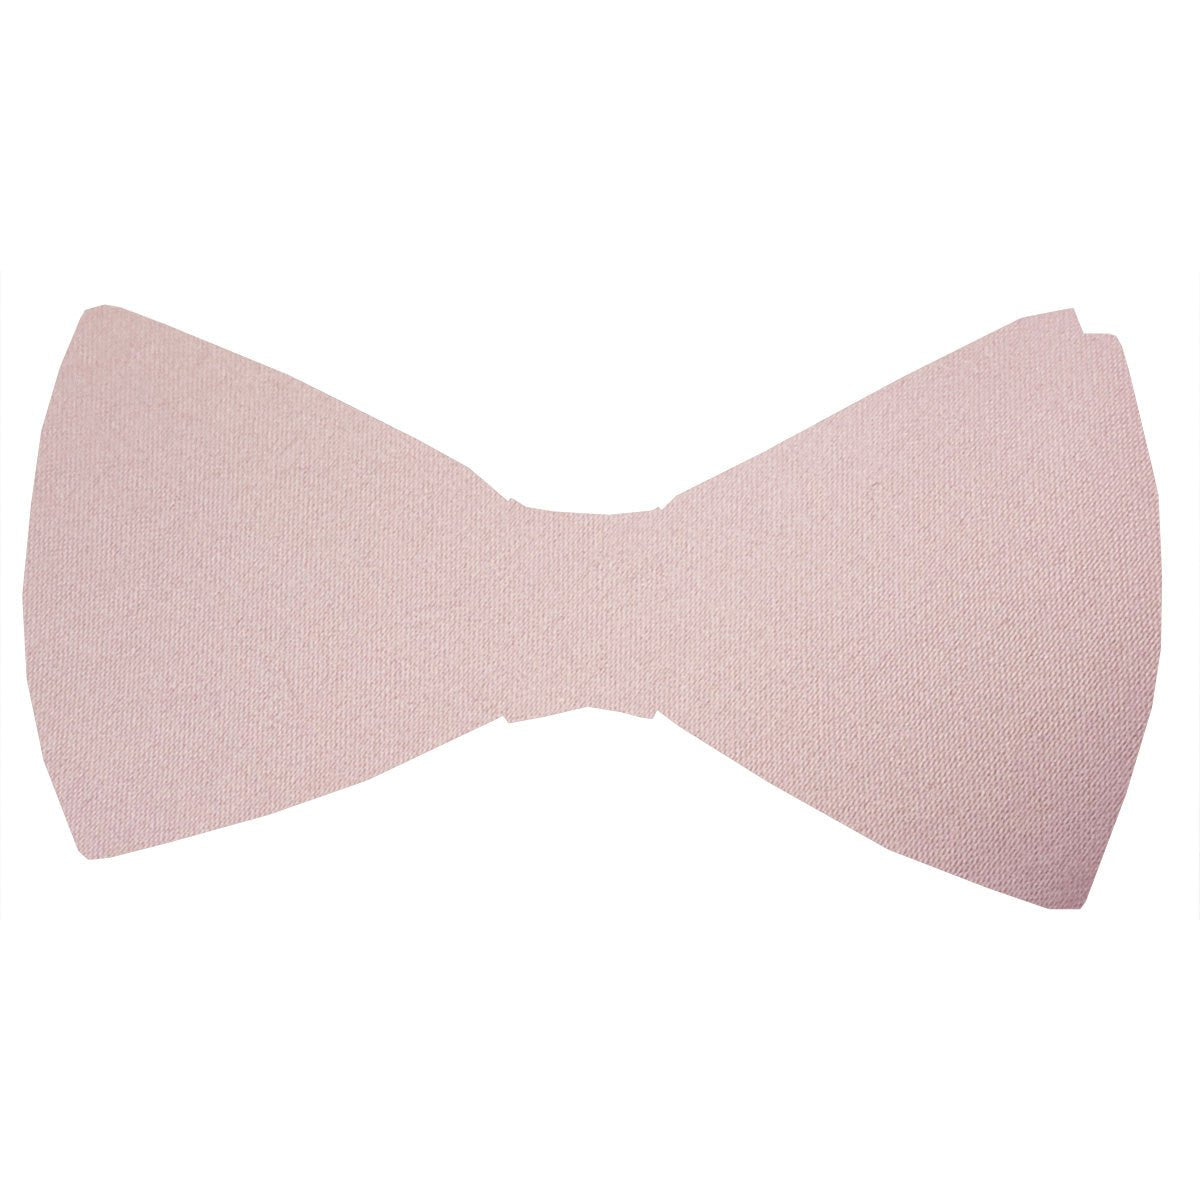 Cashmere Grey Bow Ties - Wedding Bow Tie - Pre-Tied - Swagger & Swoon